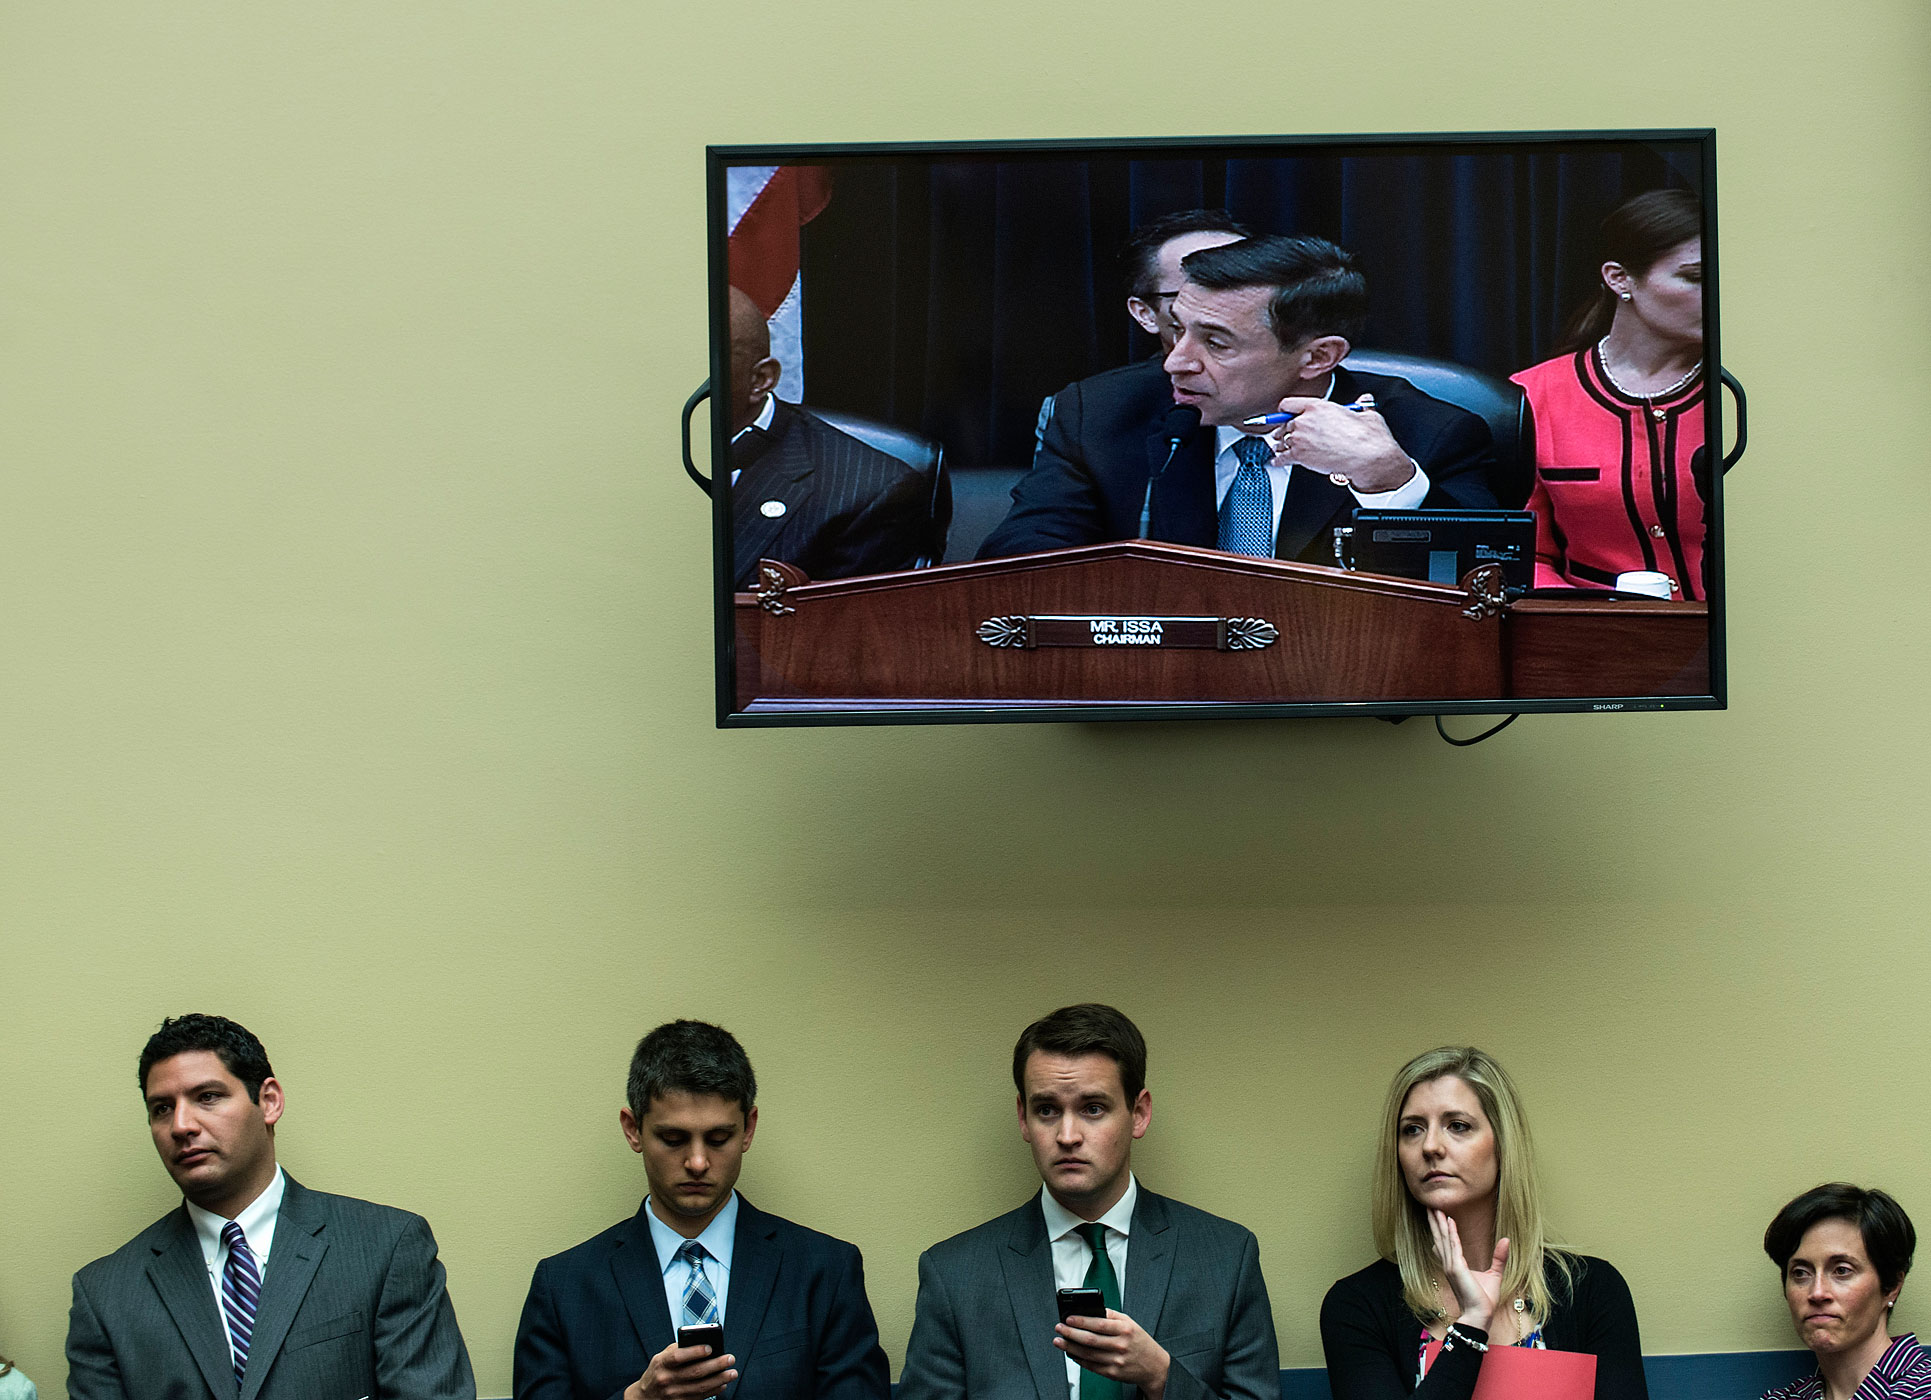 Committee Chairman Rep. Darrell Issa is seen on a screen speaking during a hearing of the House Committee On Oversight and Government Reform on Capitol Hill in Washington, May 8, 2013.